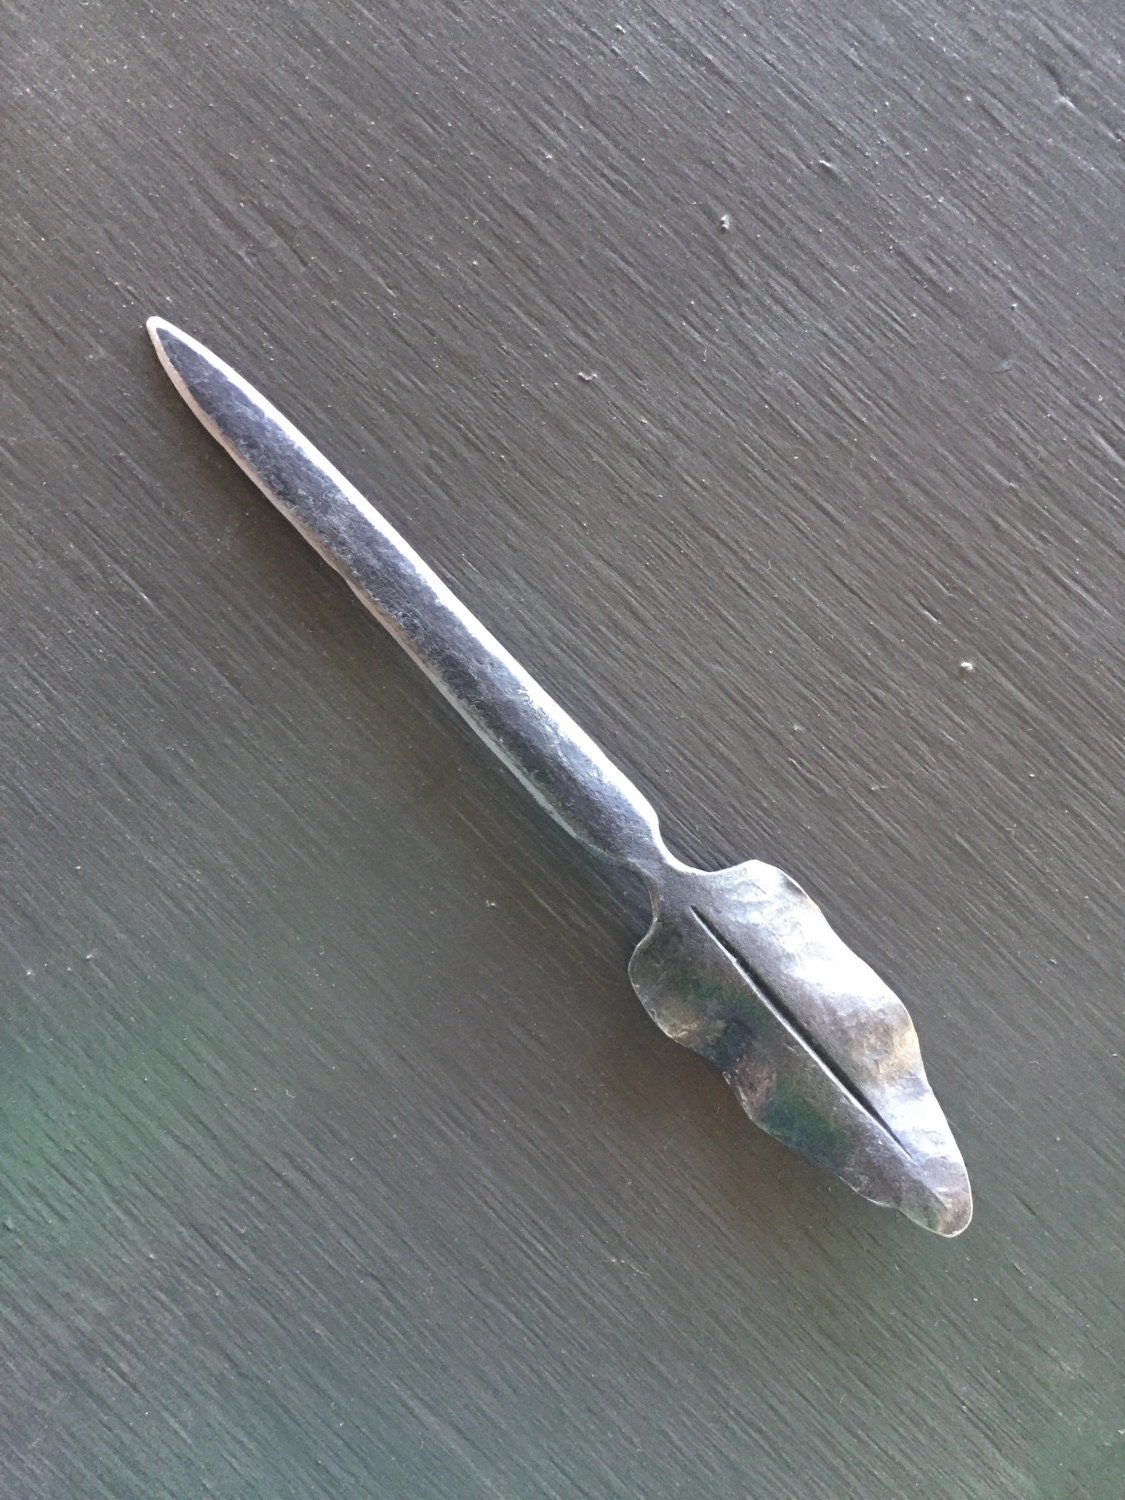 Personalized Letter Opener - Leaf